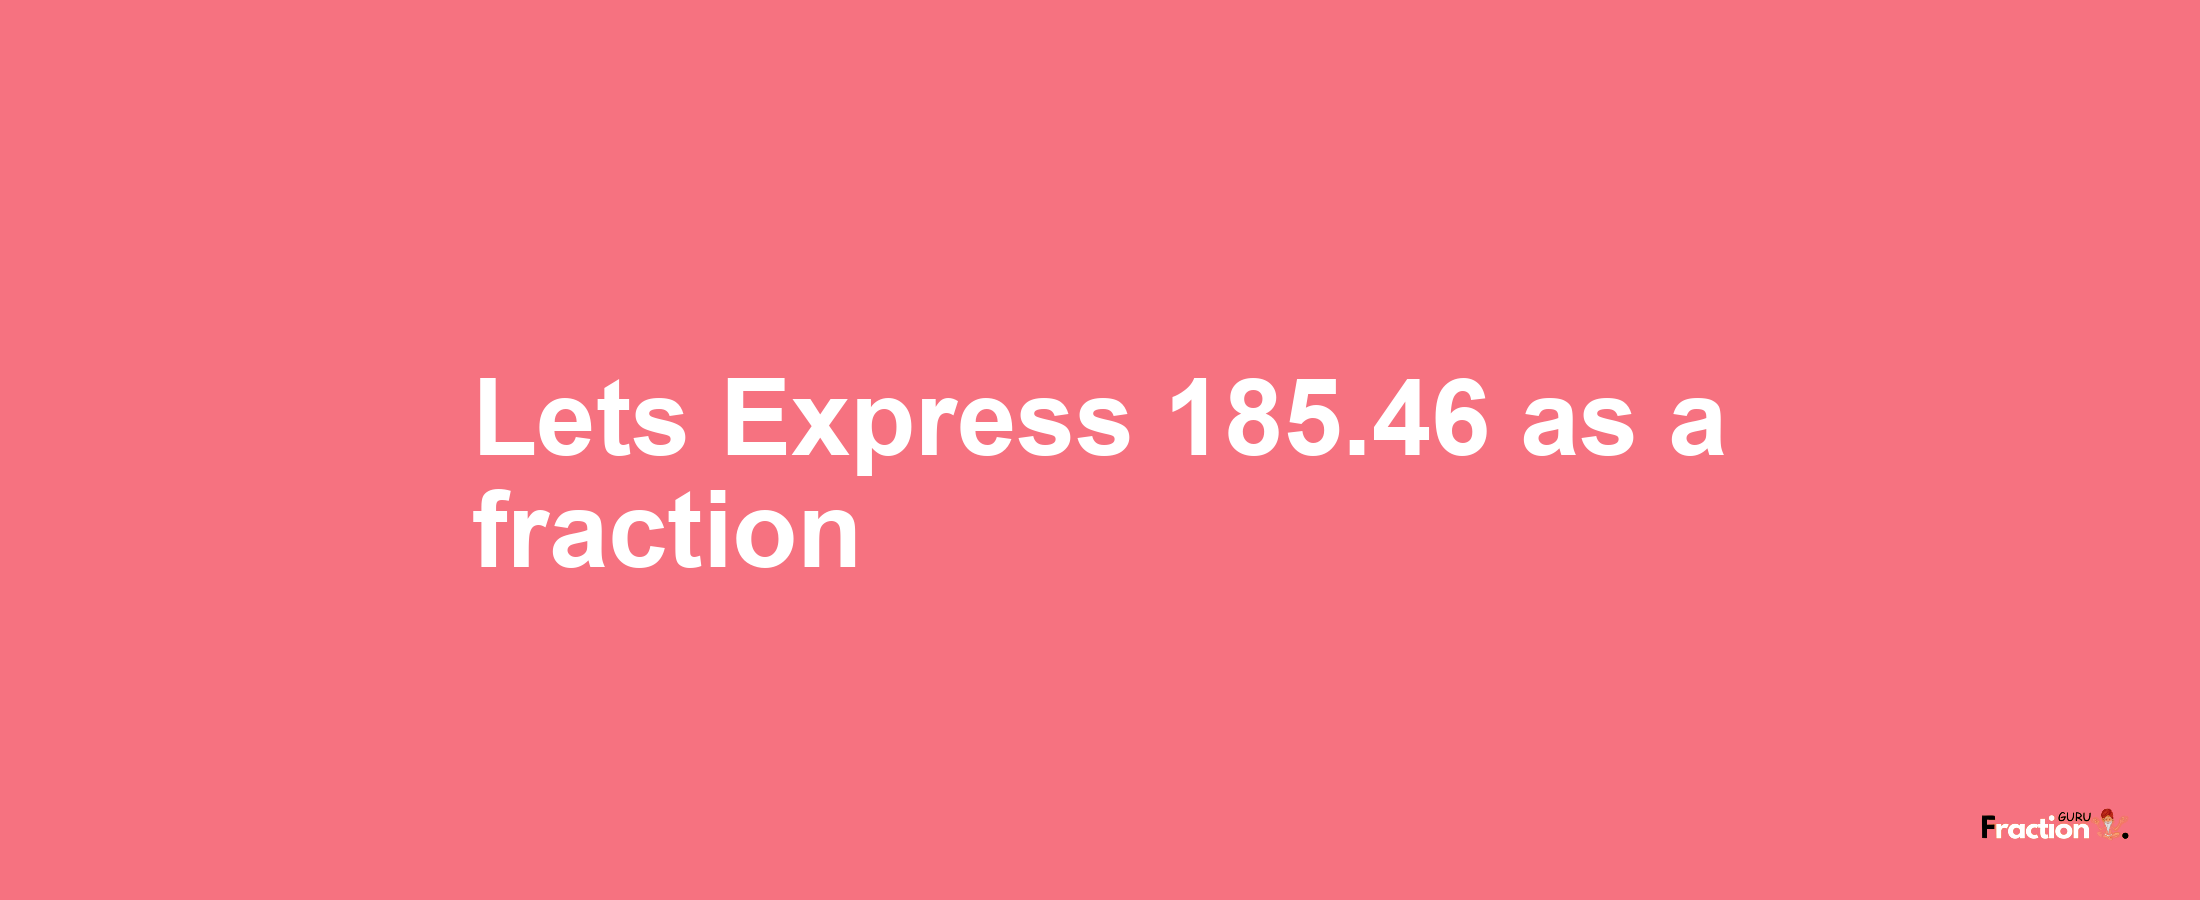 Lets Express 185.46 as afraction